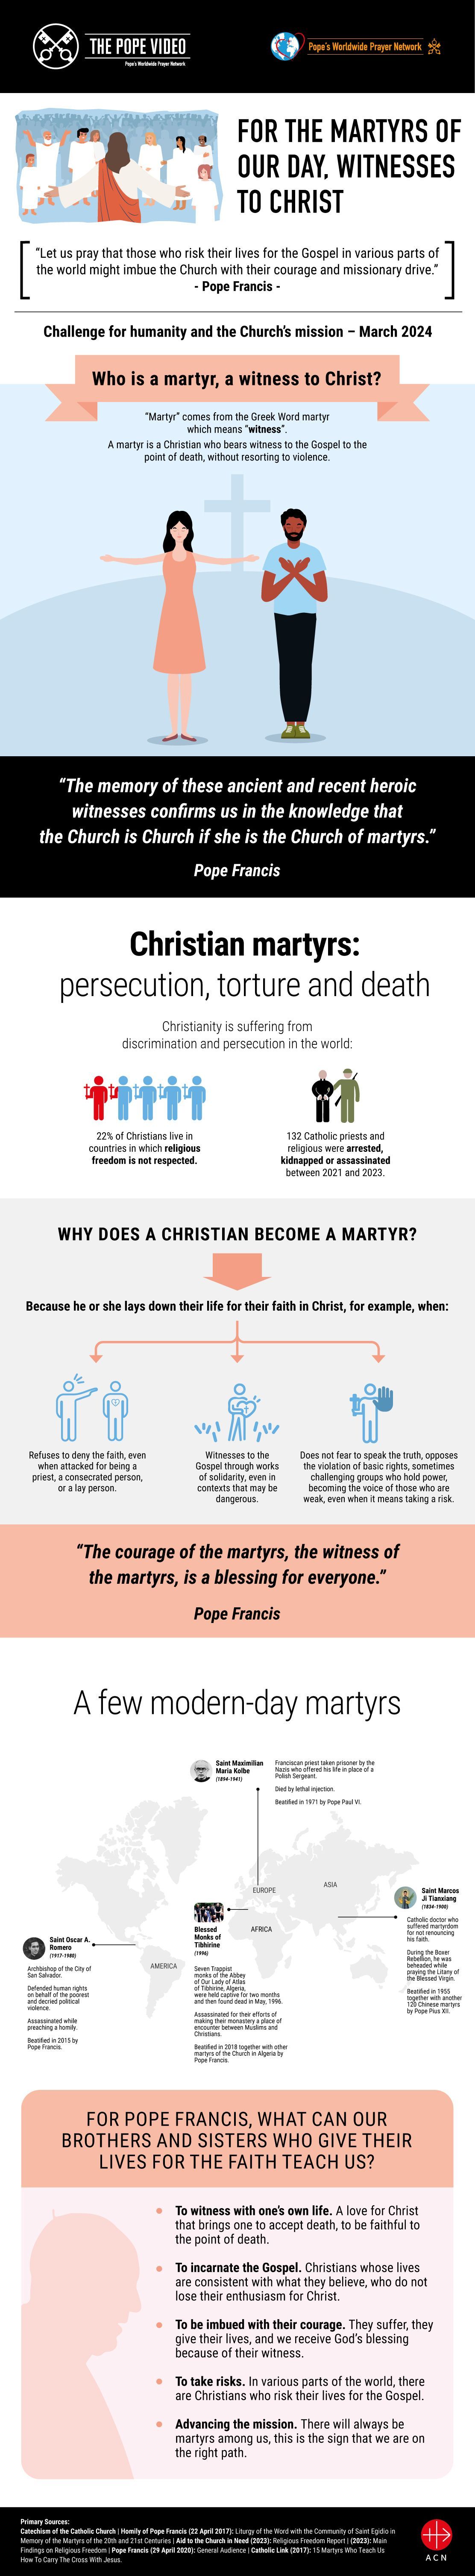 an infographic about the Pope's request to pray for the terminally ill